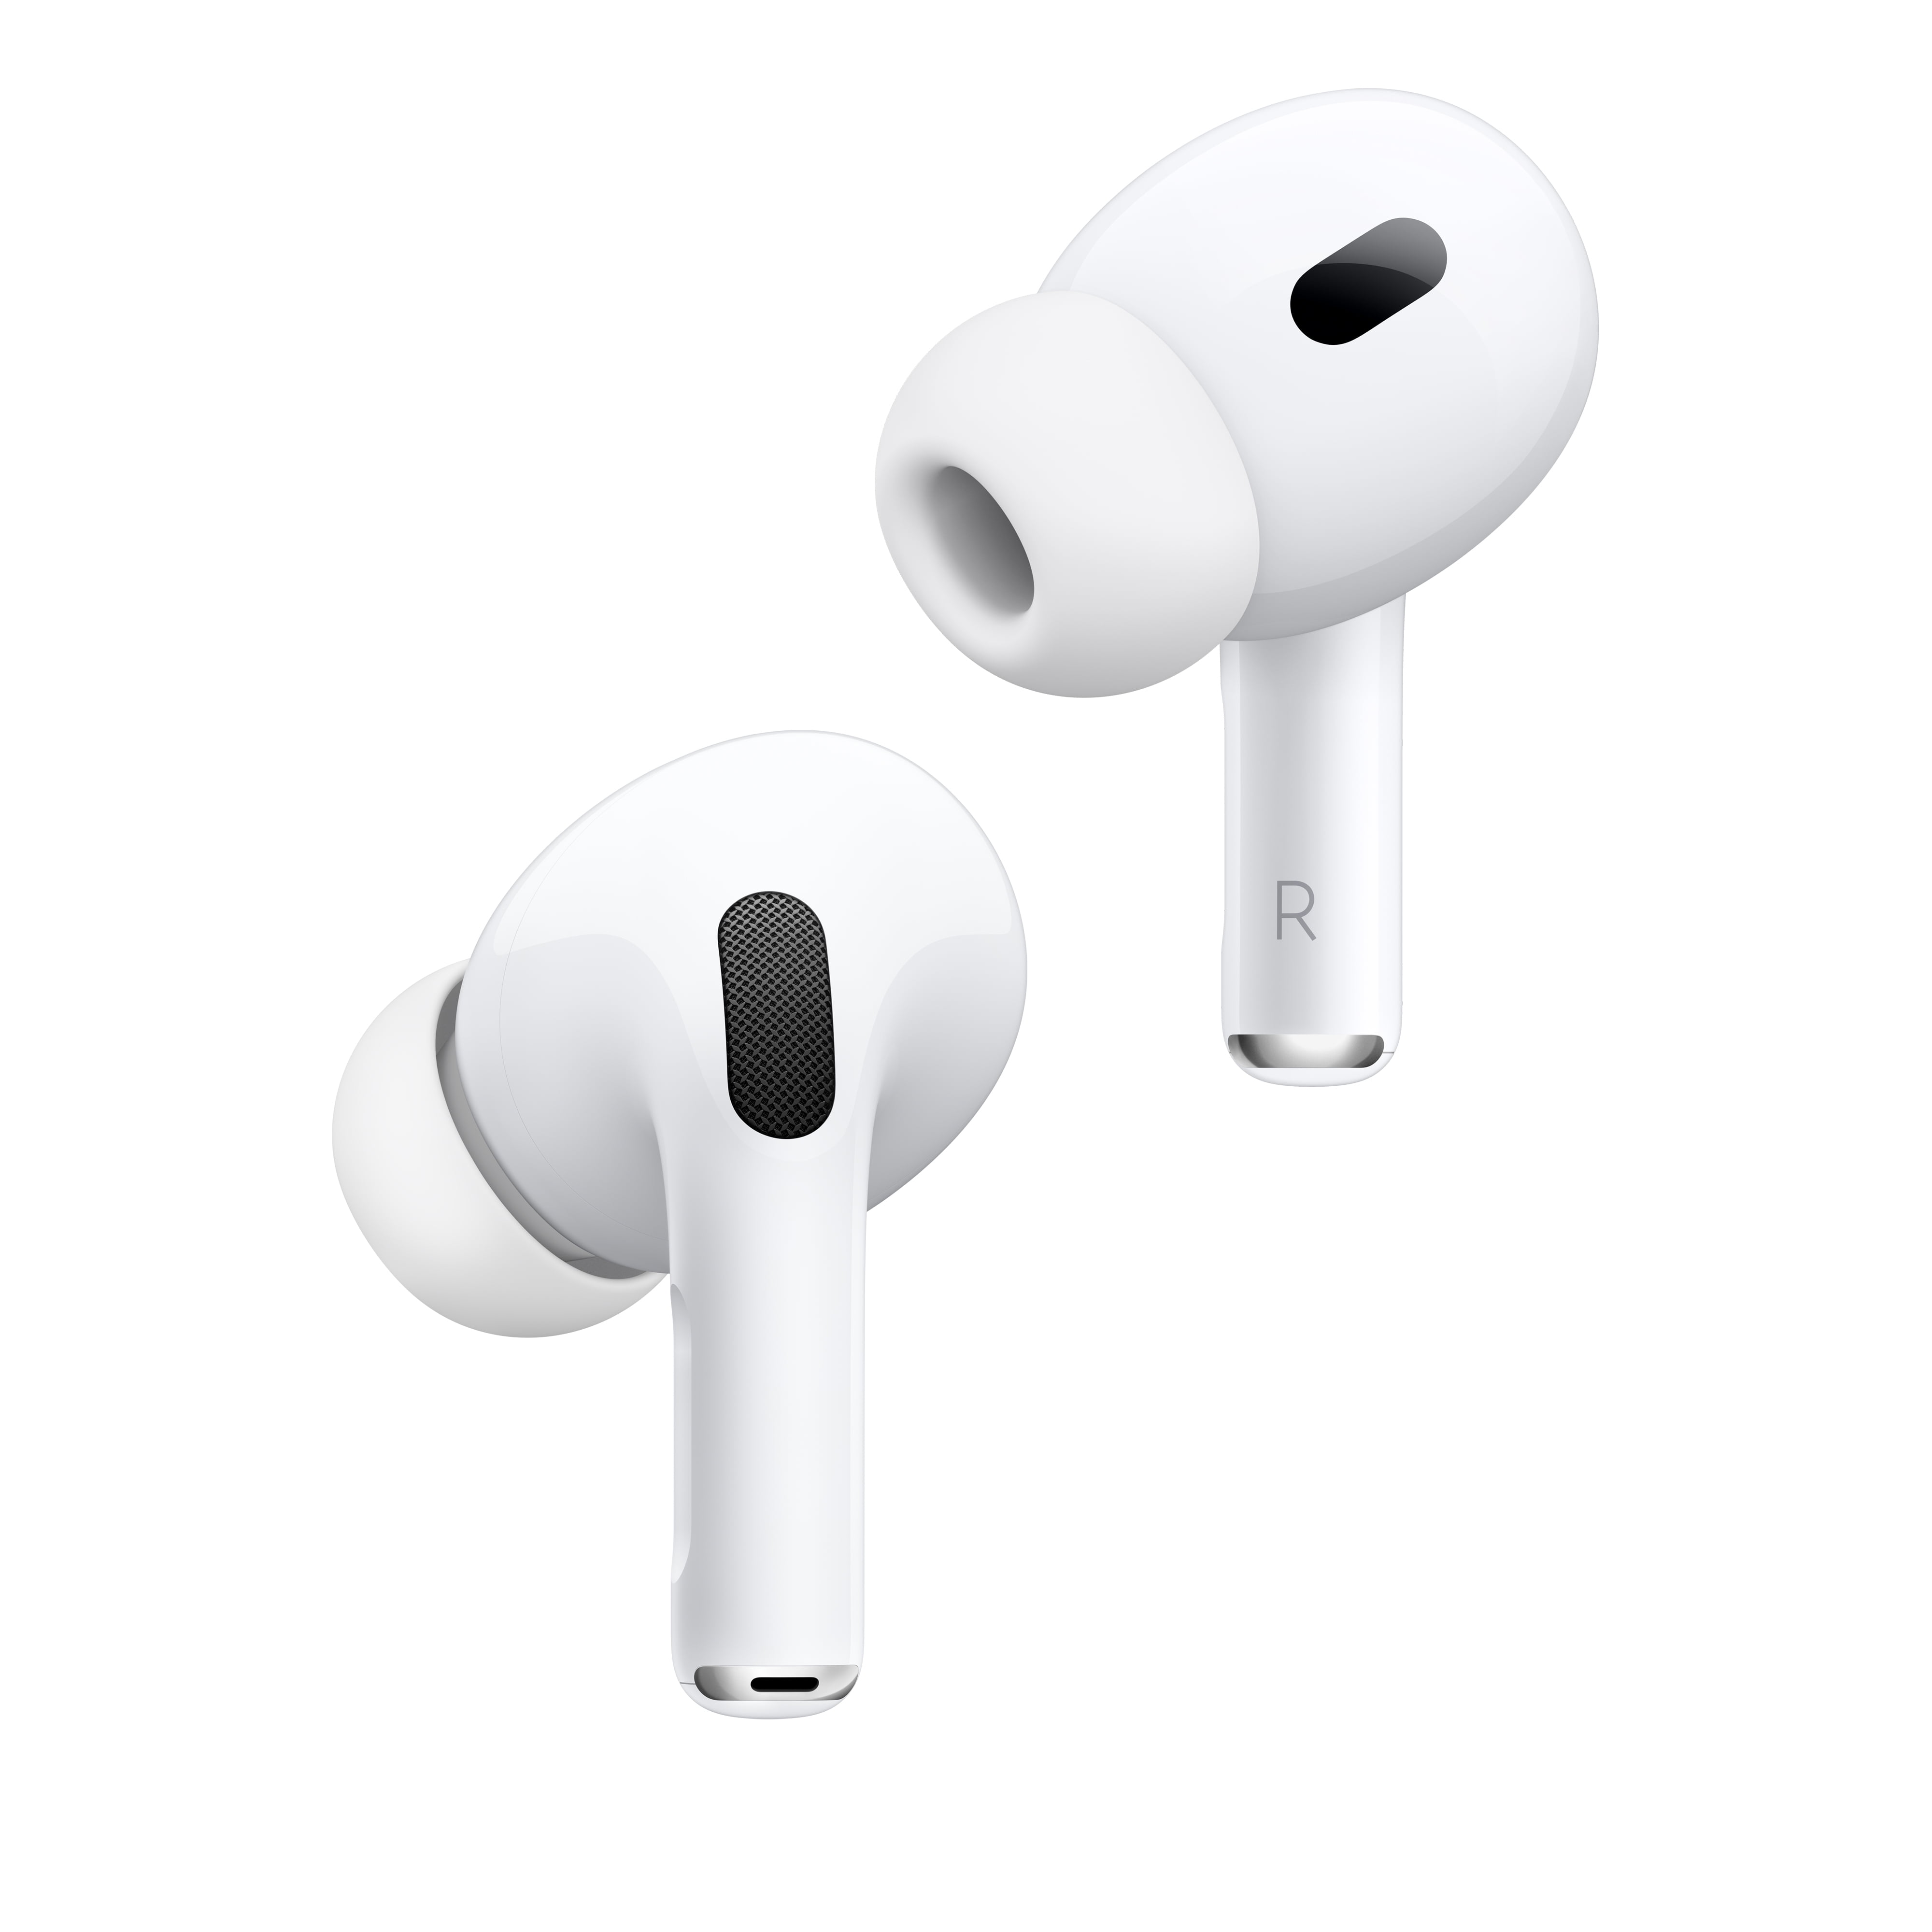 Apple AirPods Pro (2nd Generation) With Lightning Connector $189